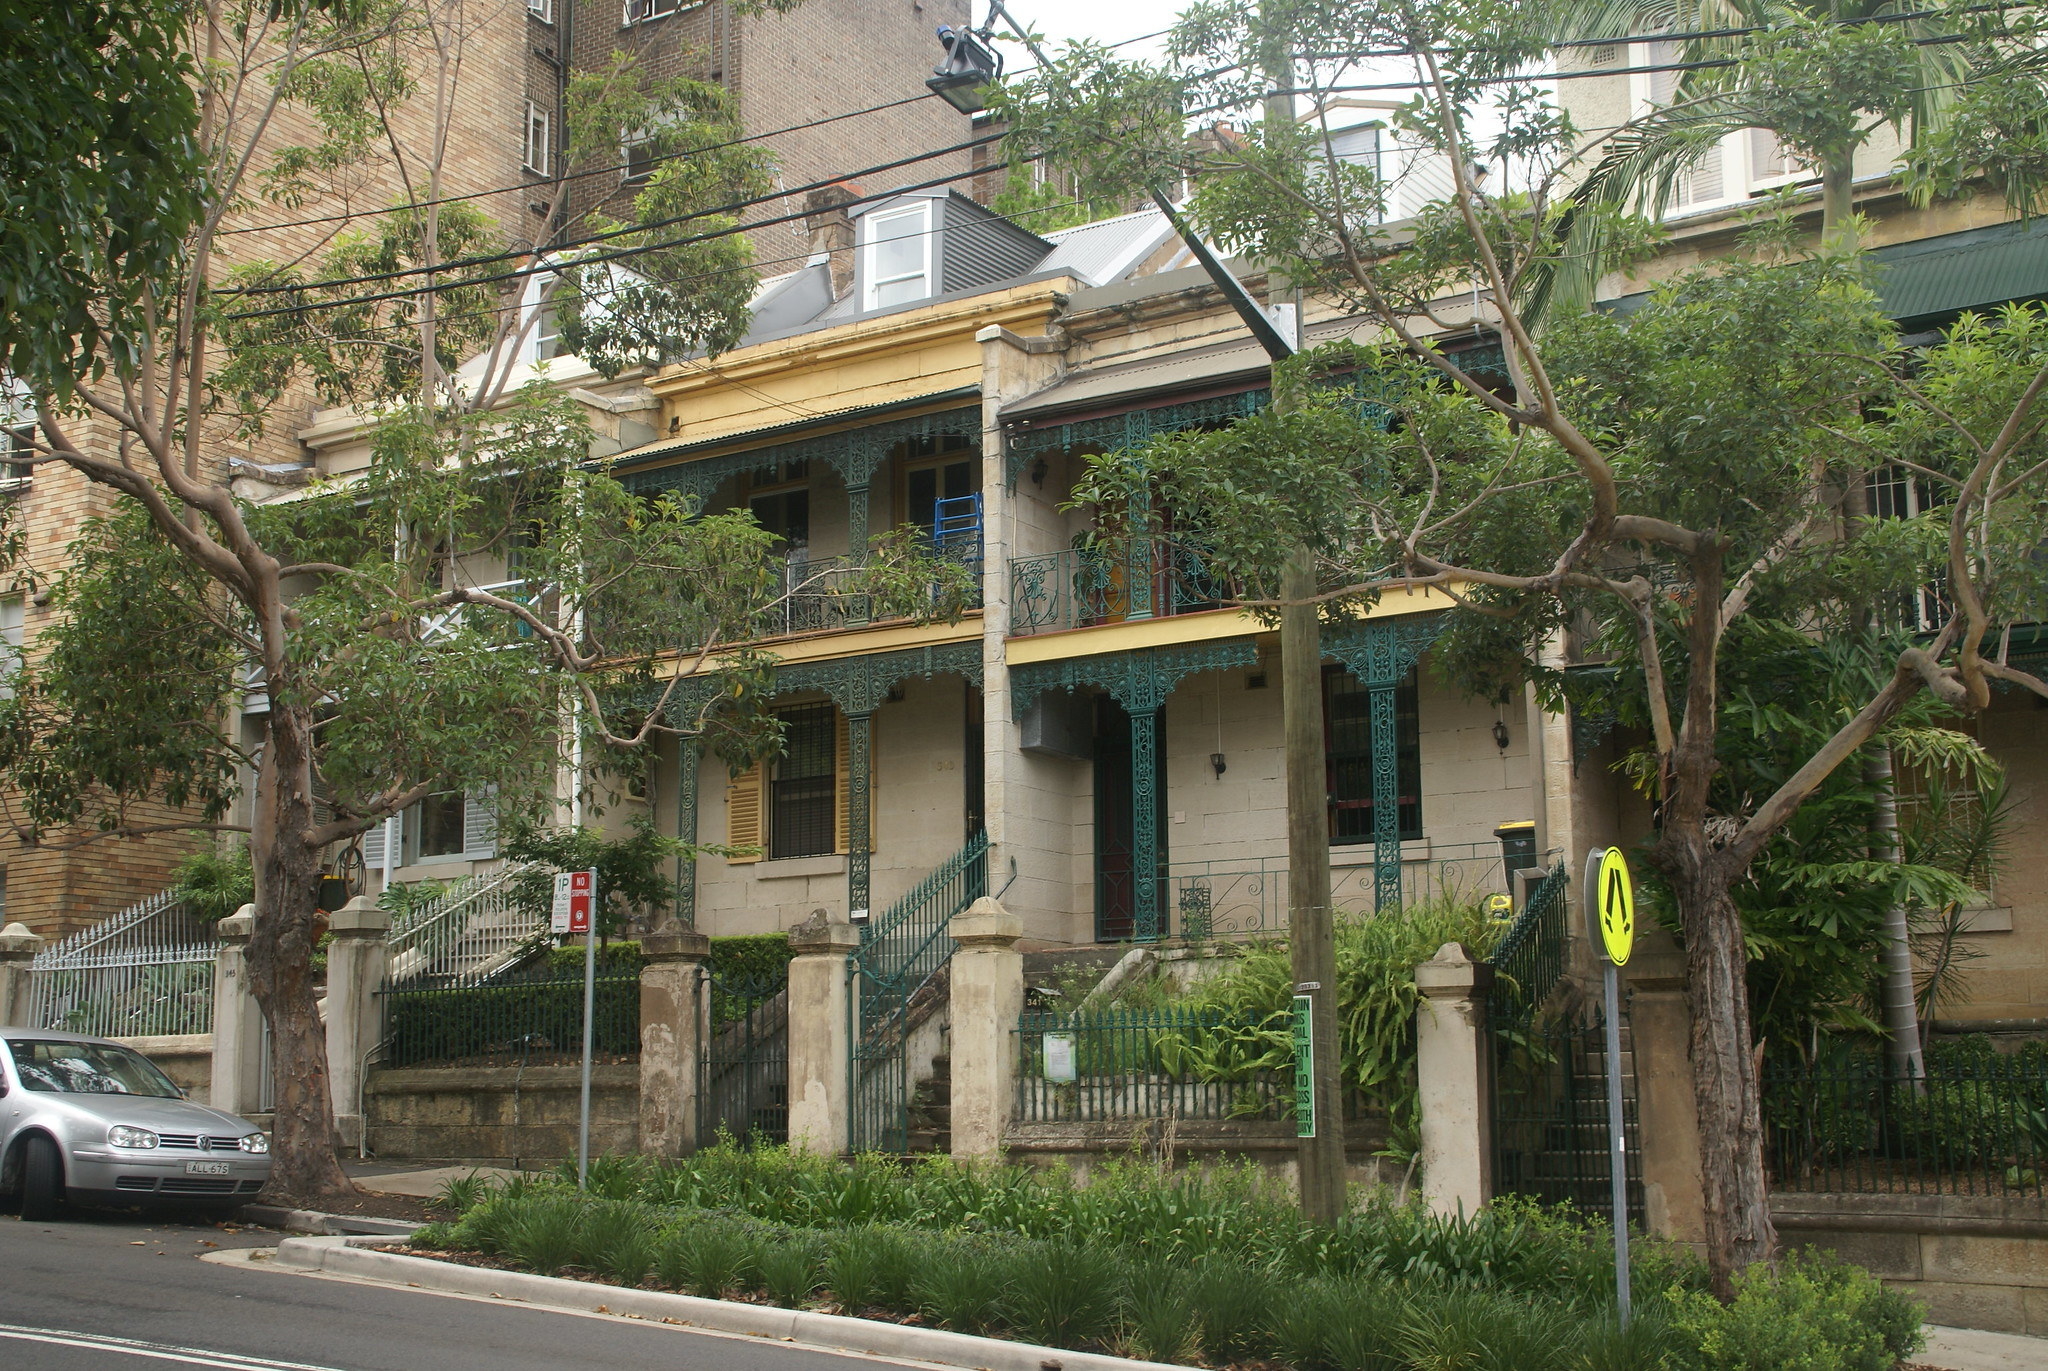 outside an older apartment building with two floors and trees surrounding